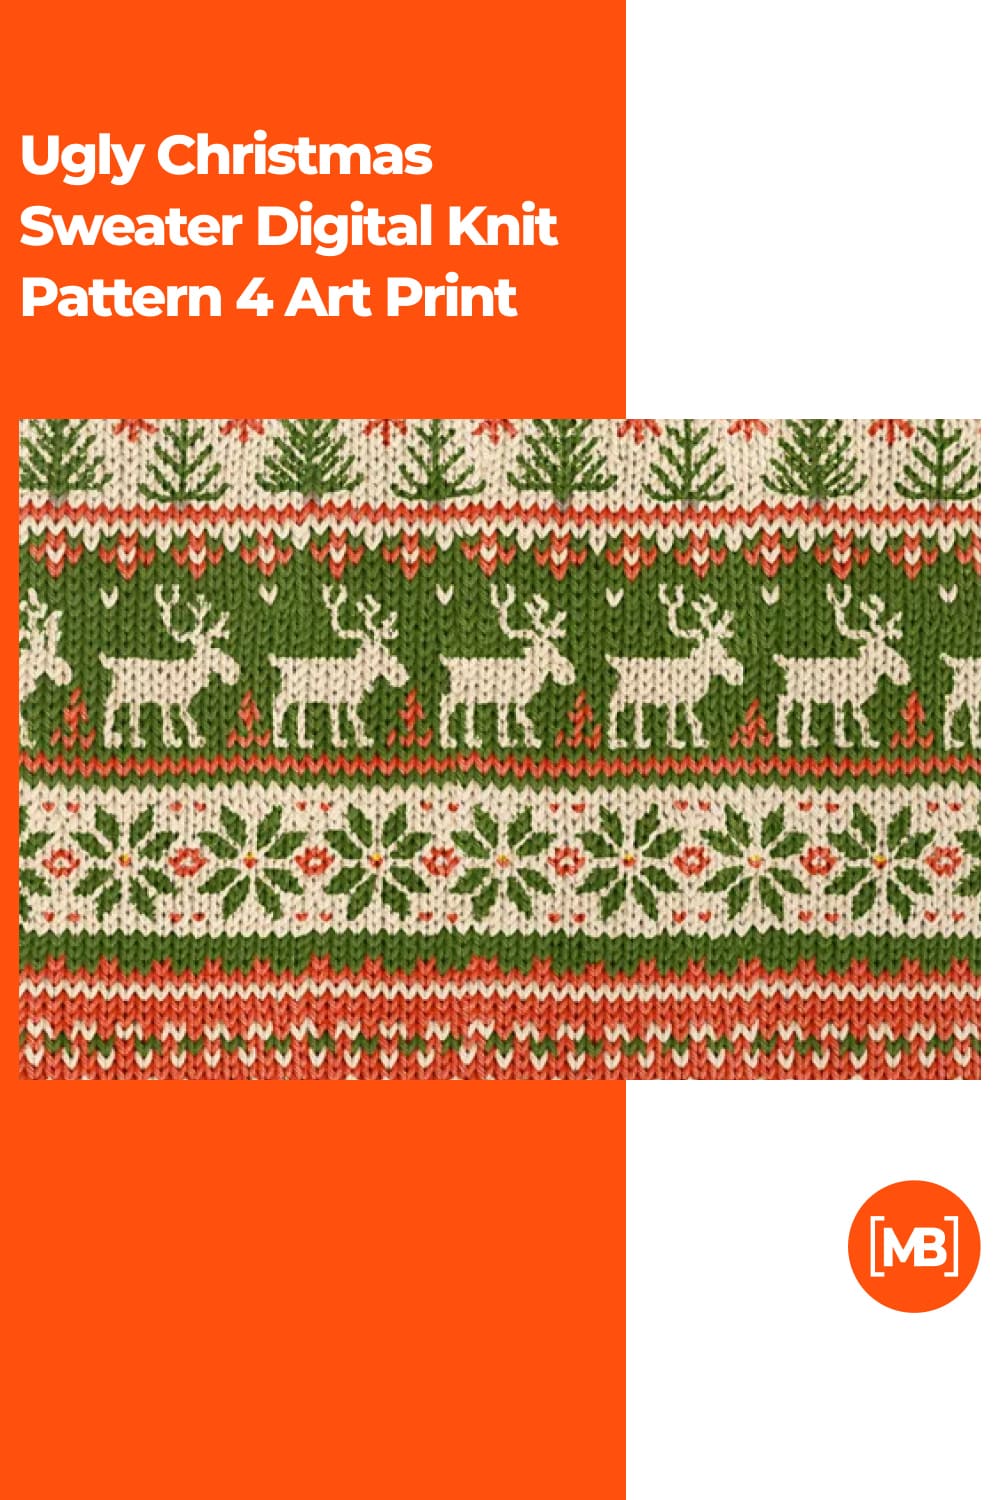 Intense print with deer and snowflakes in green mixed with red threads.